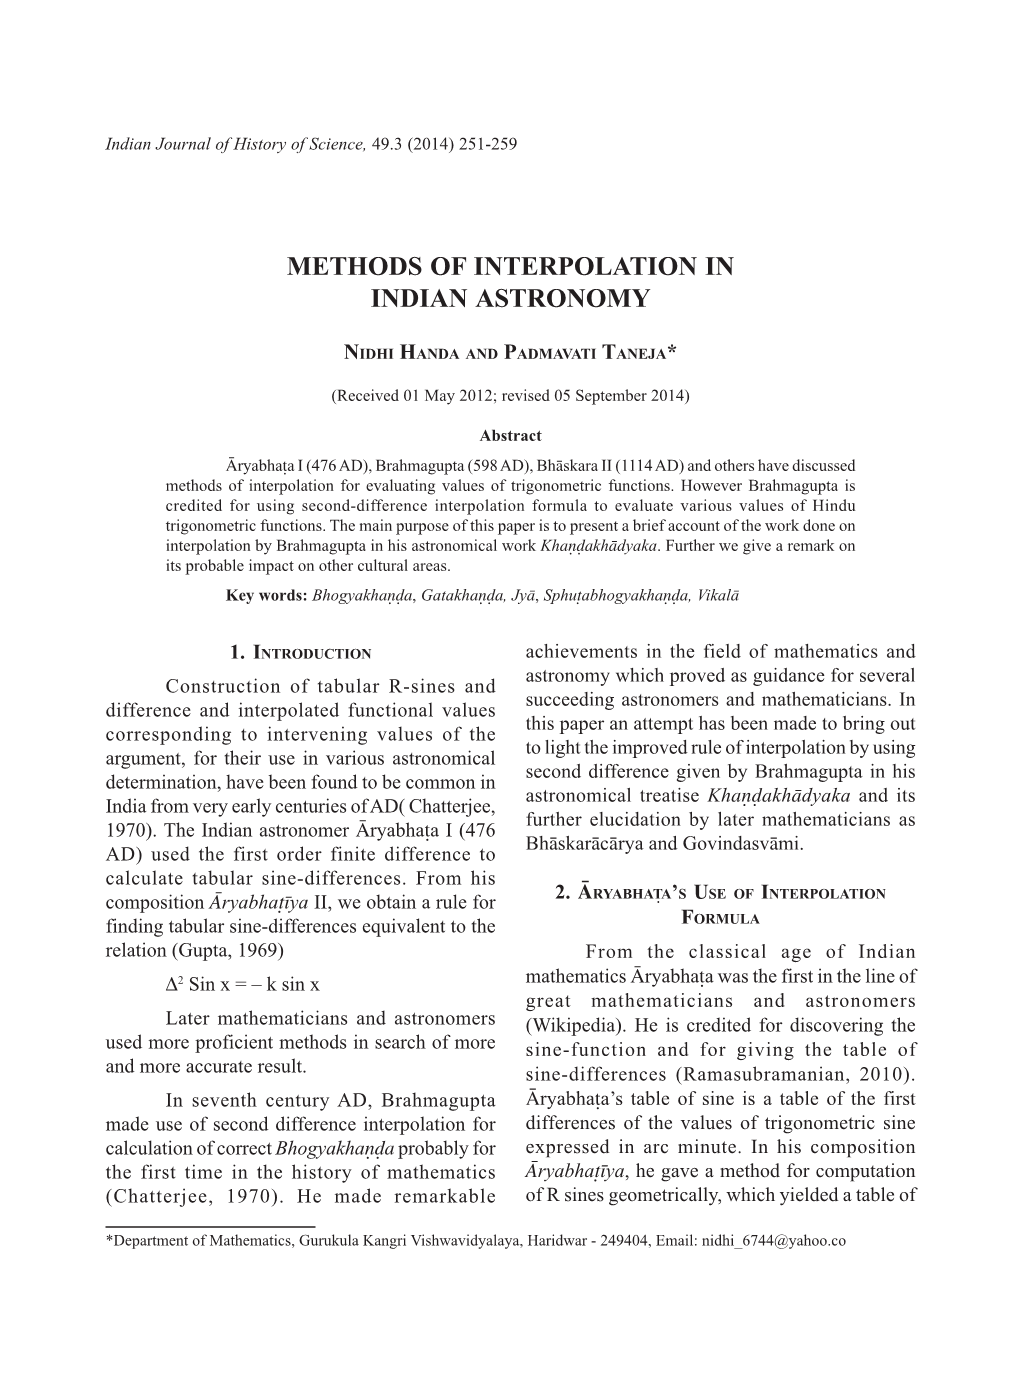 Methods of Interpolation in Indian Astronomy